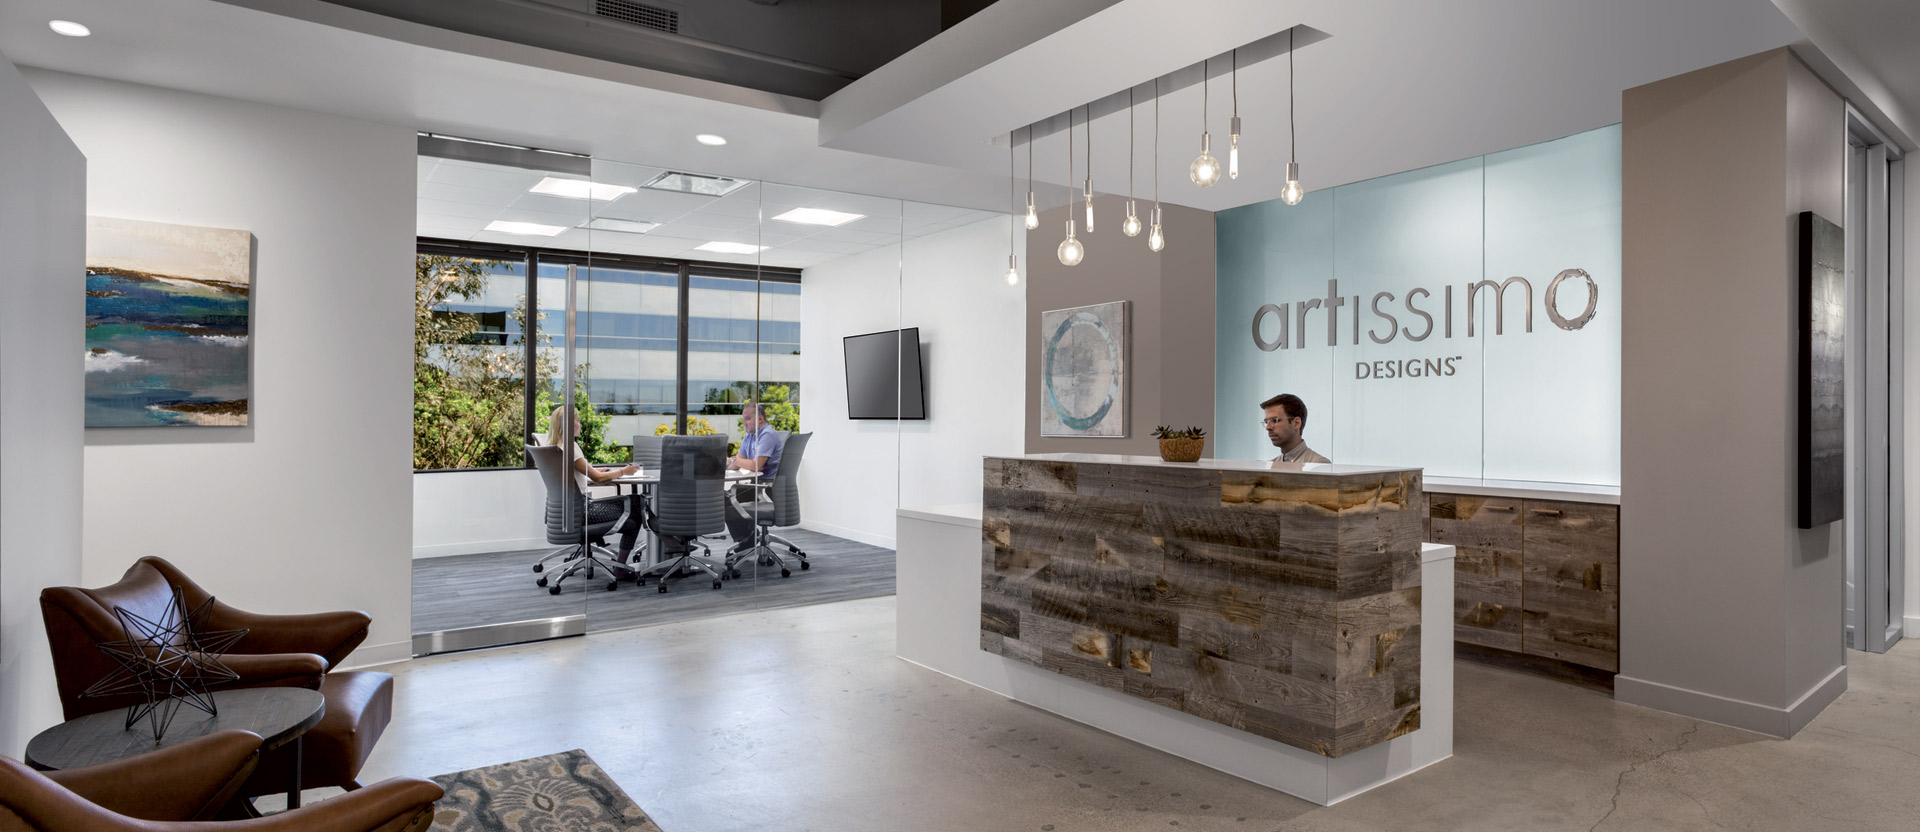 Modern office lobby with rustic wooden reception desk and sleek, white brand wall signage. Pendant lights hang above, contrasted by polished concrete floors and contemporary furniture, featuring expansive windows with outdoor patio access.